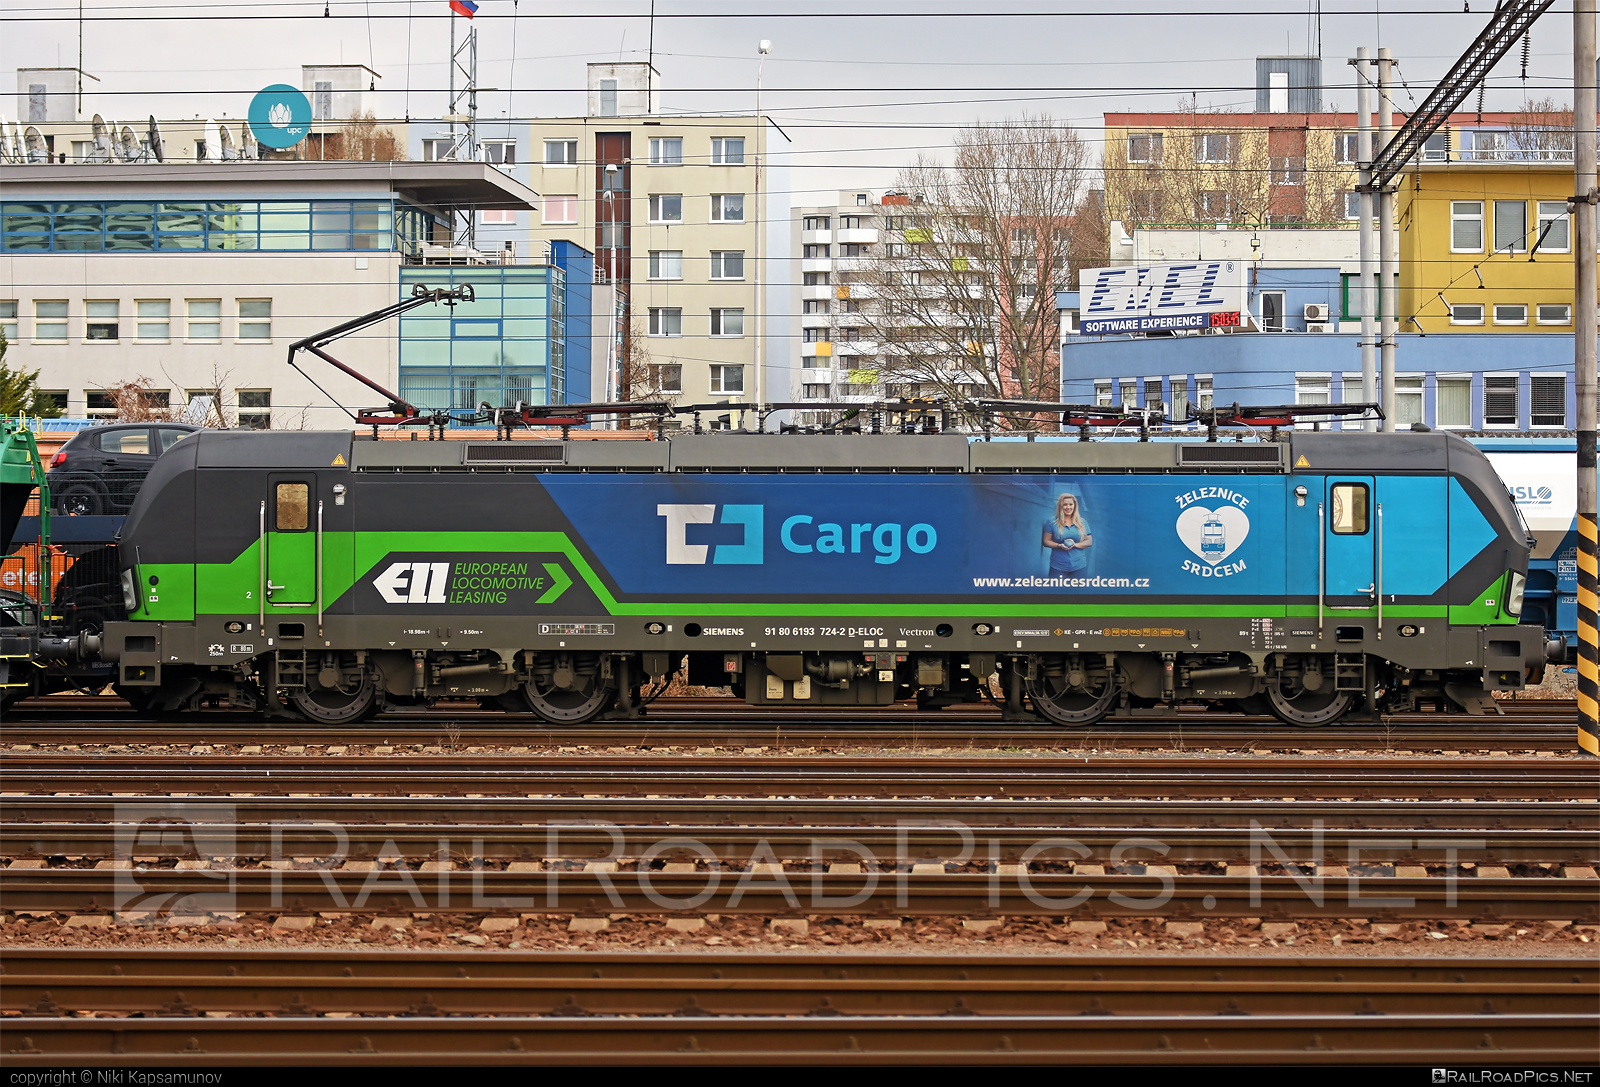 Siemens Vectron MS - 193 724 operated by ČD Cargo, a.s. #cdcargo #ell #ellgermany #eloc #europeanlocomotiveleasing #siemens #siemensVectron #siemensVectronMS #vectron #vectronMS